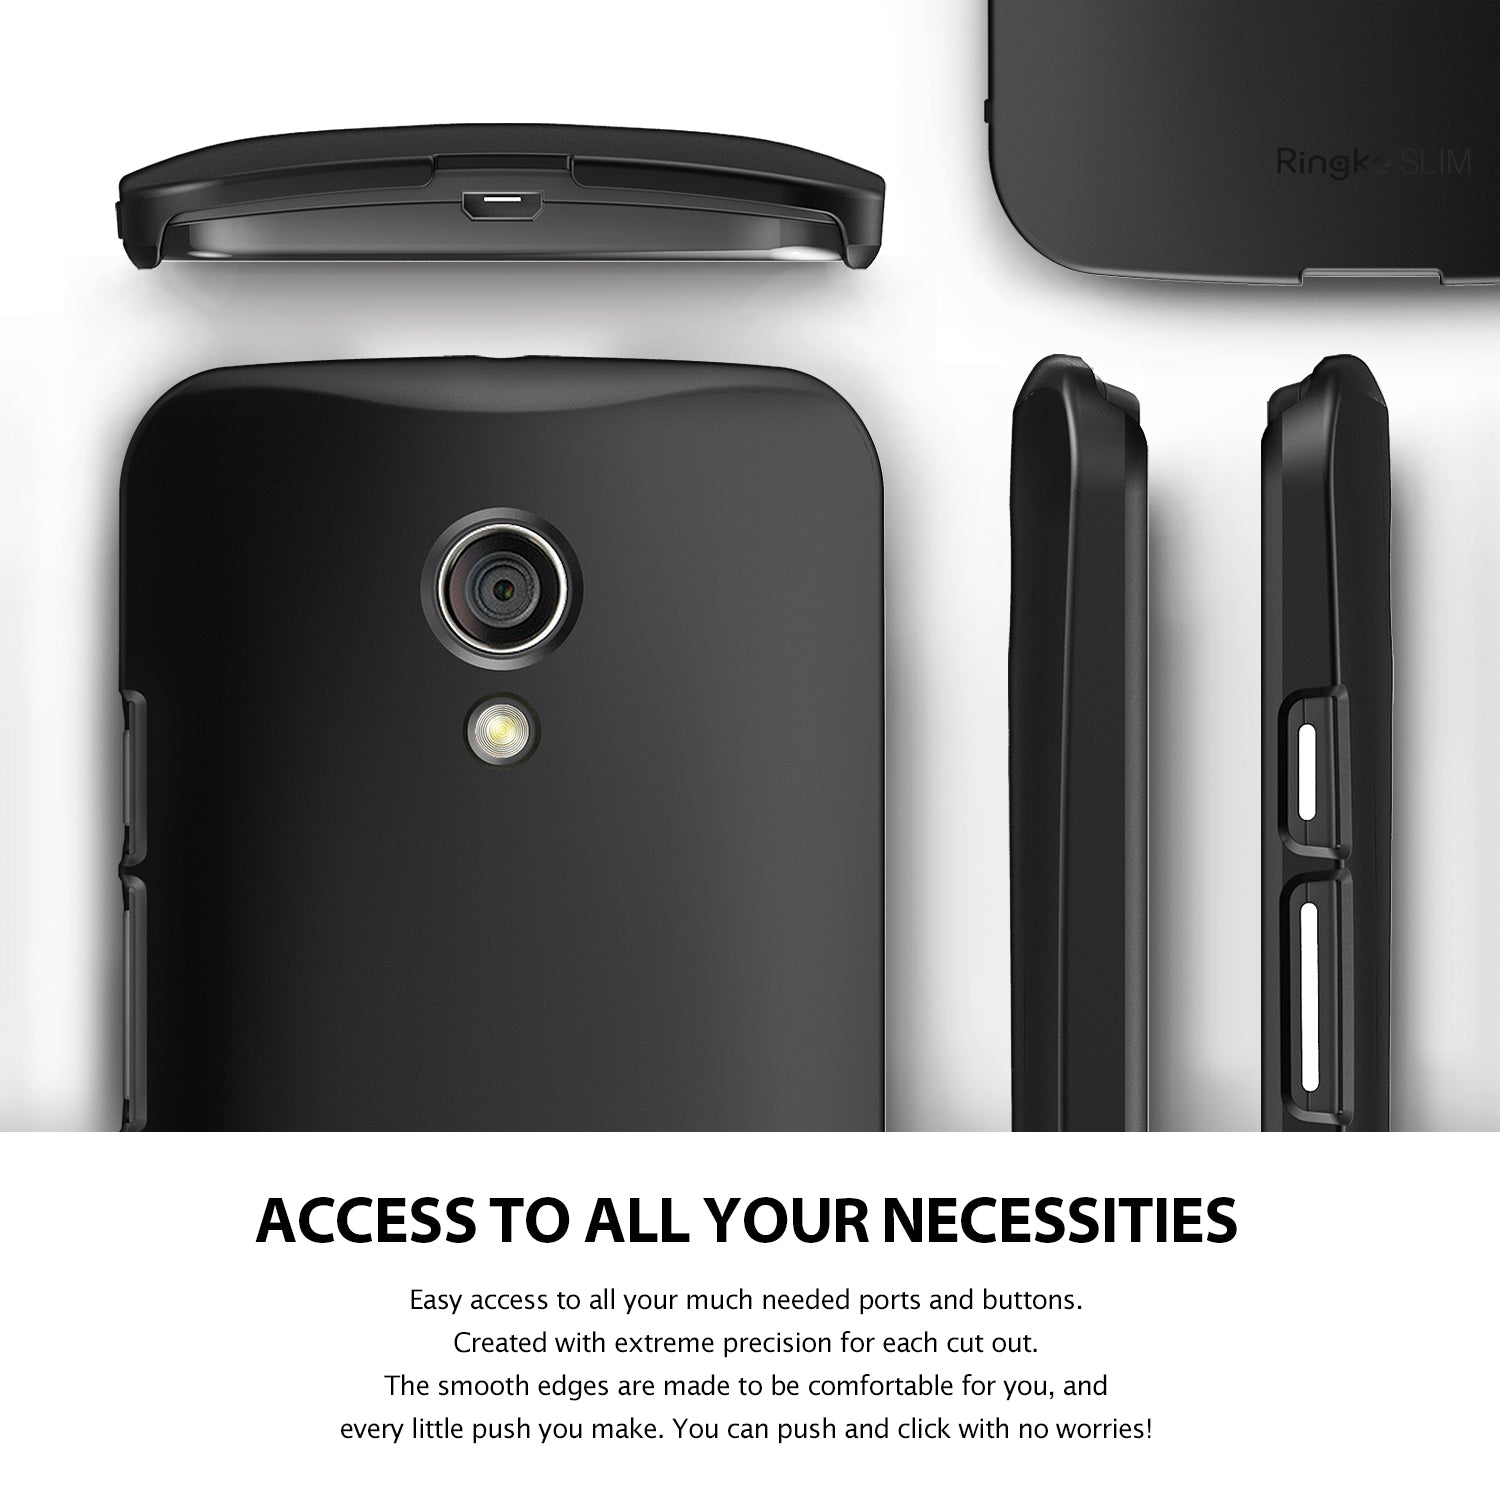 ringke slim thin lightweight hard pc back case cover for moto g 2014 2nd gen access to all ports